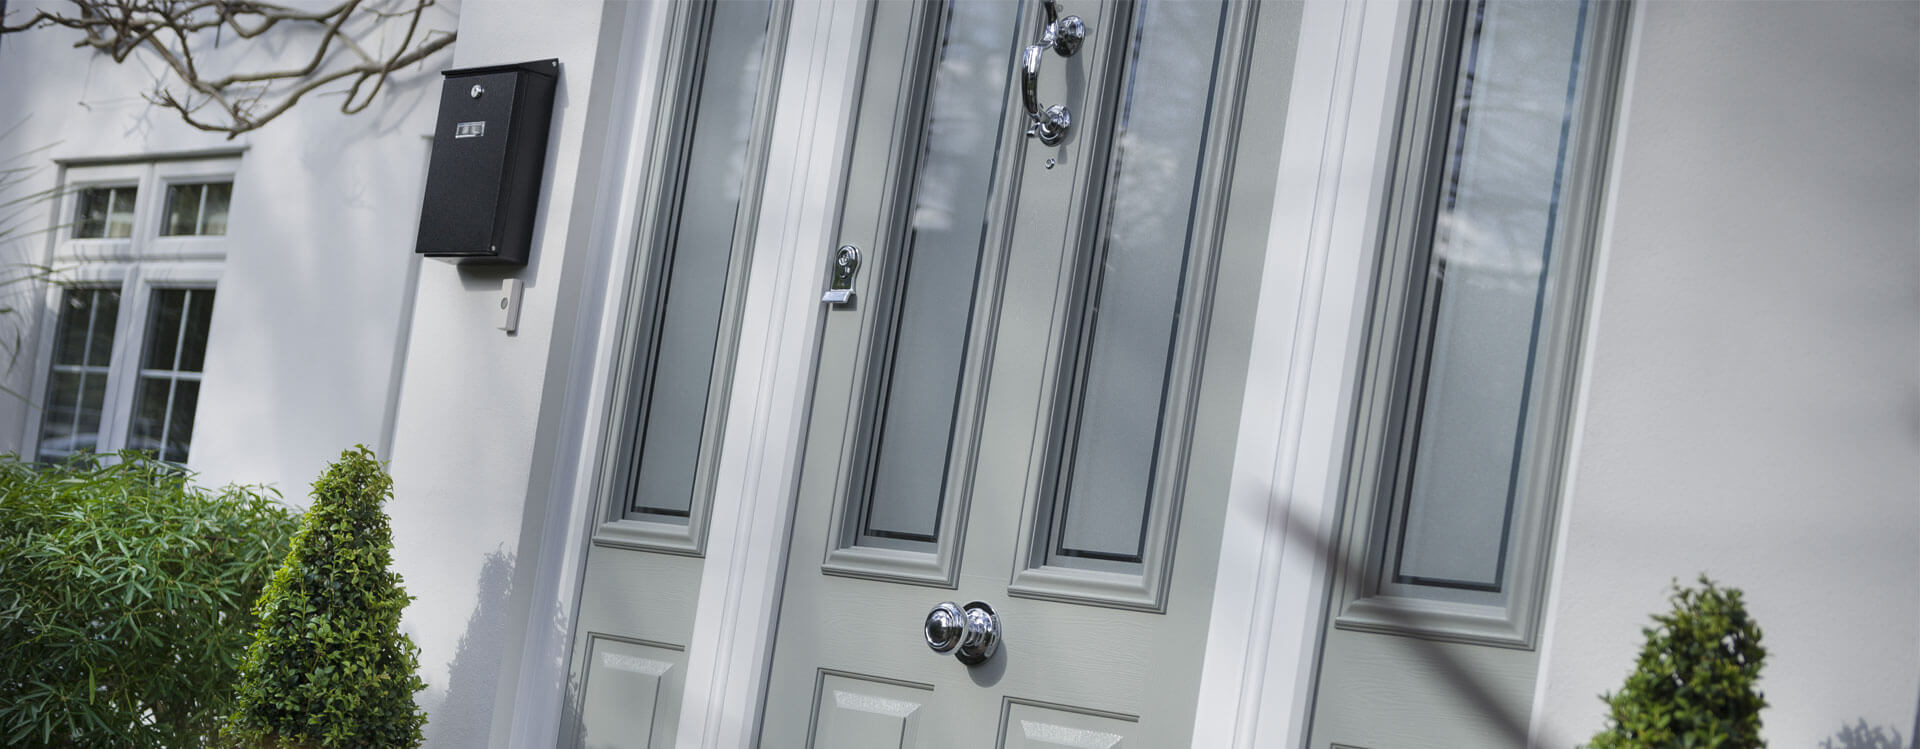 High-Level Security Solidor Composite Doors & Windows for home